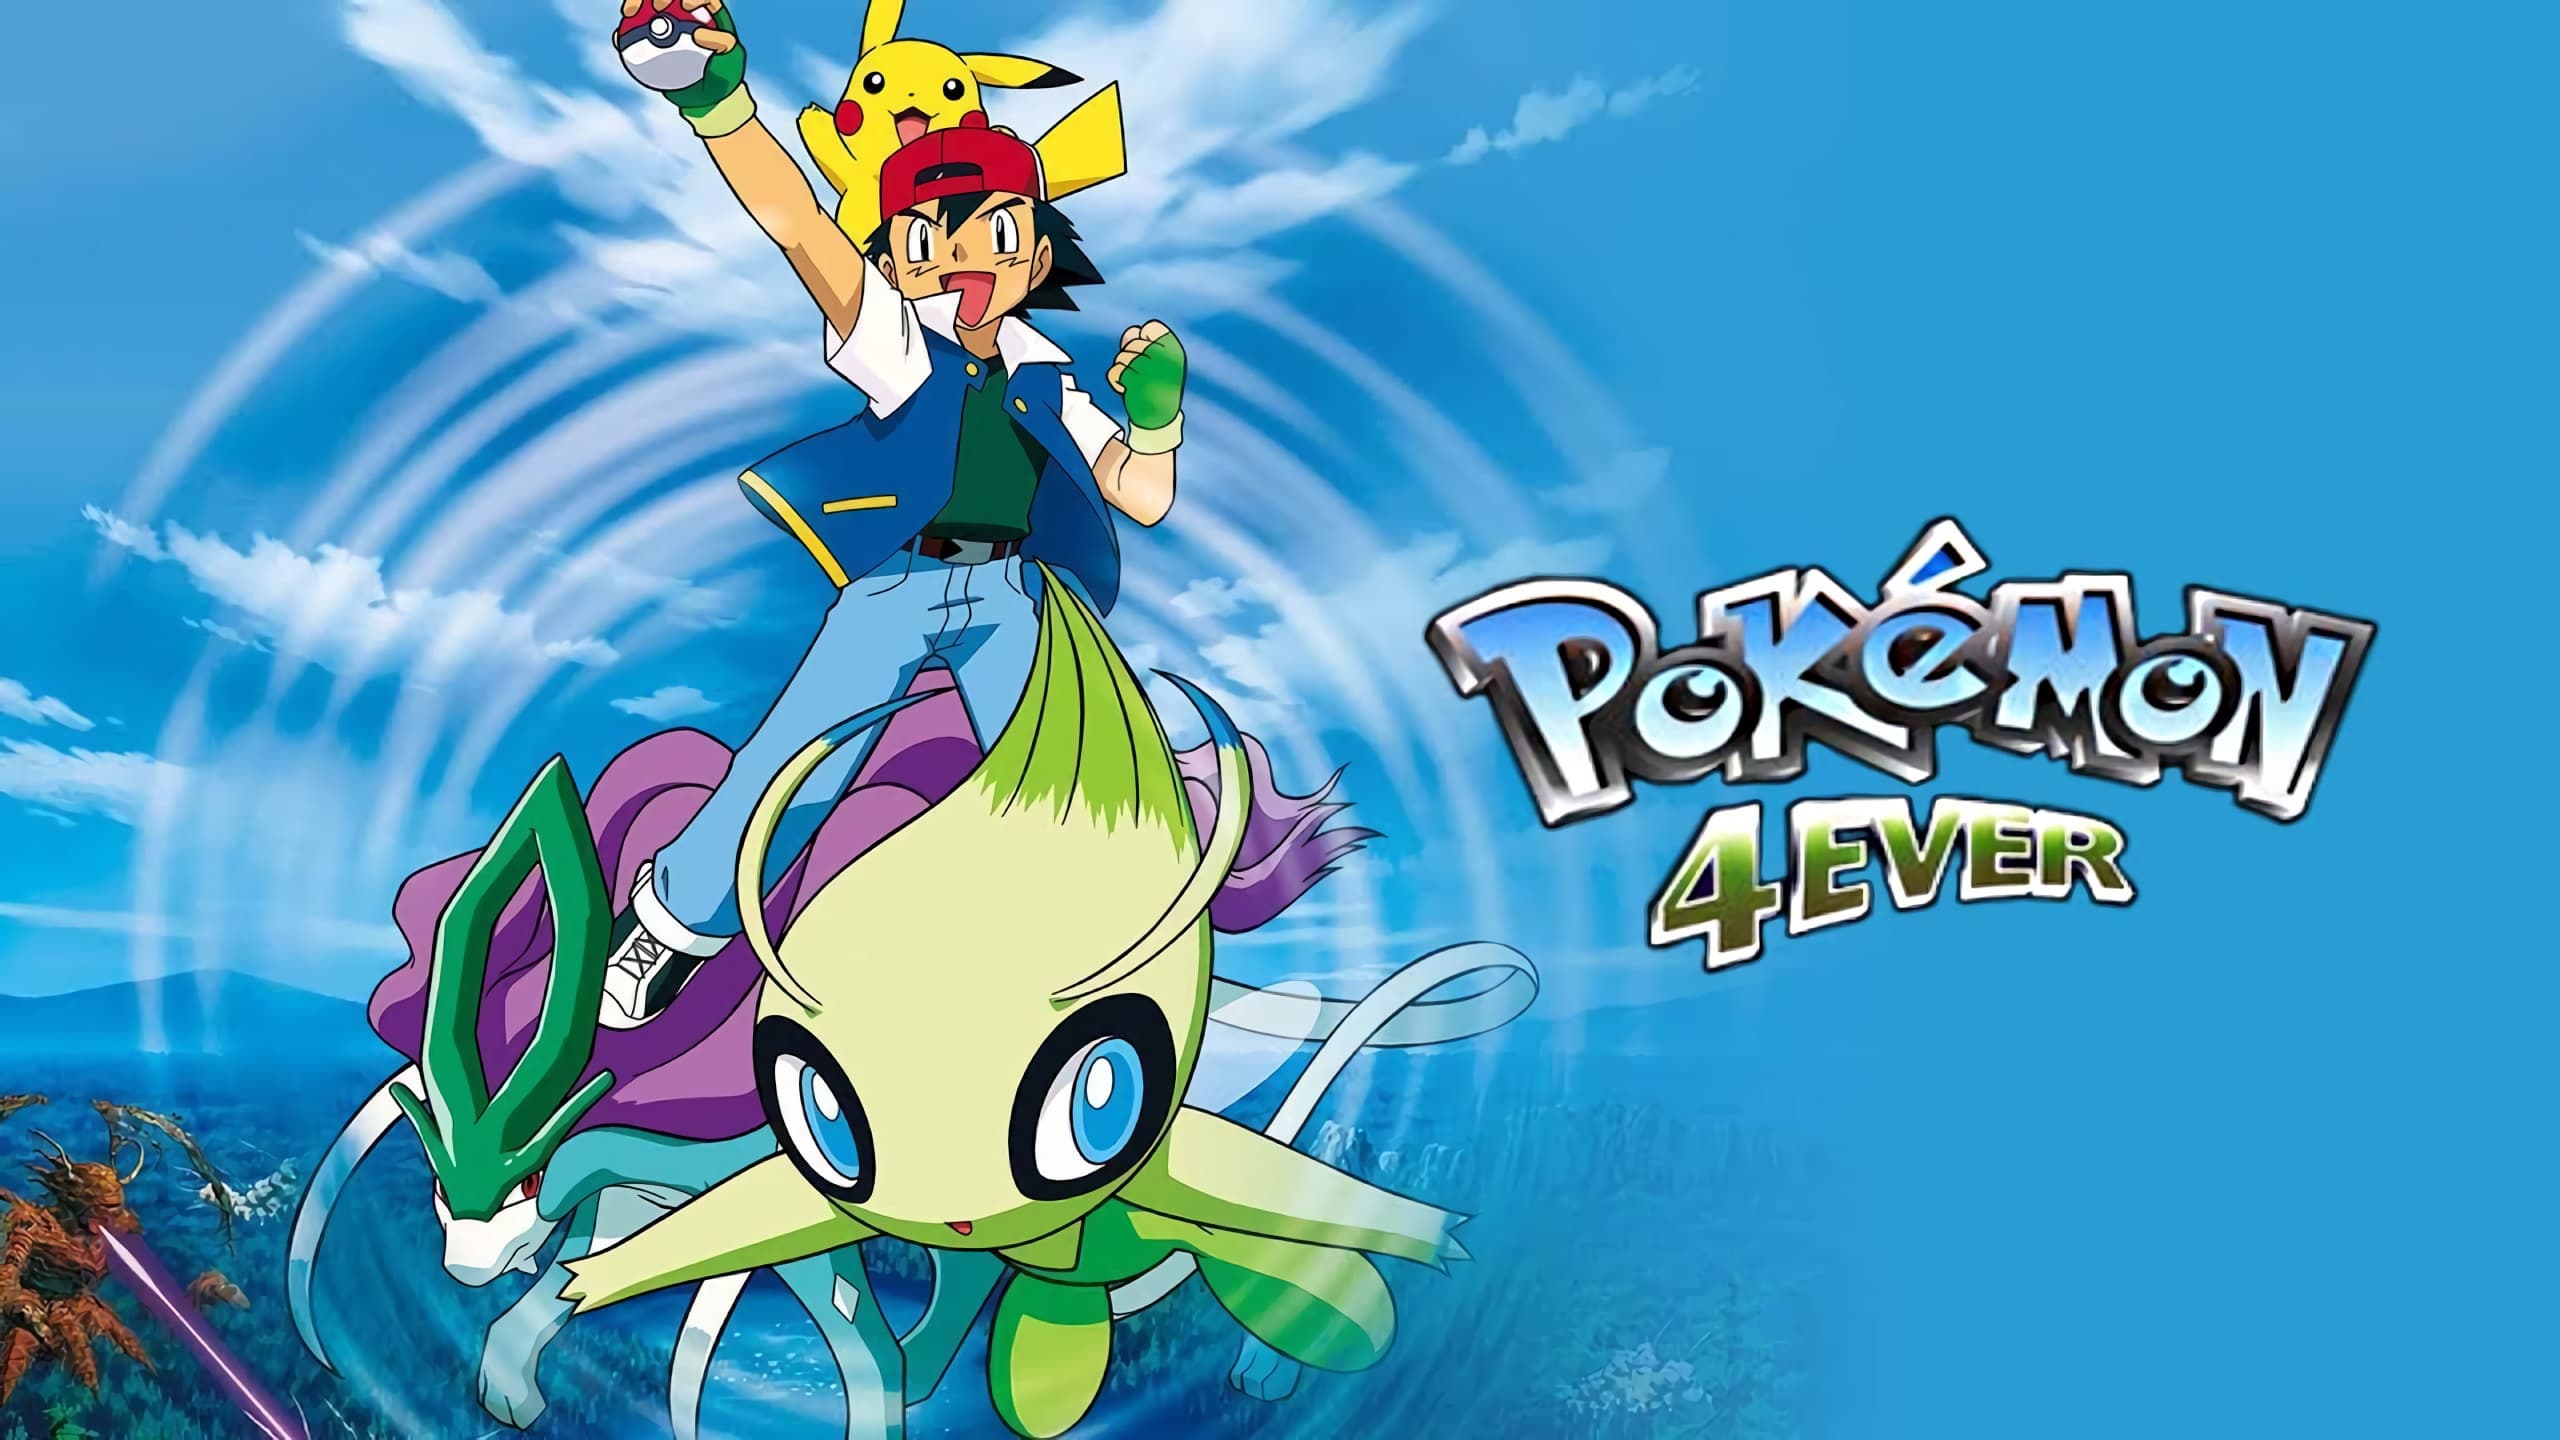 Pokemon 4Ever Celebi - Voice of the Forest (2001)